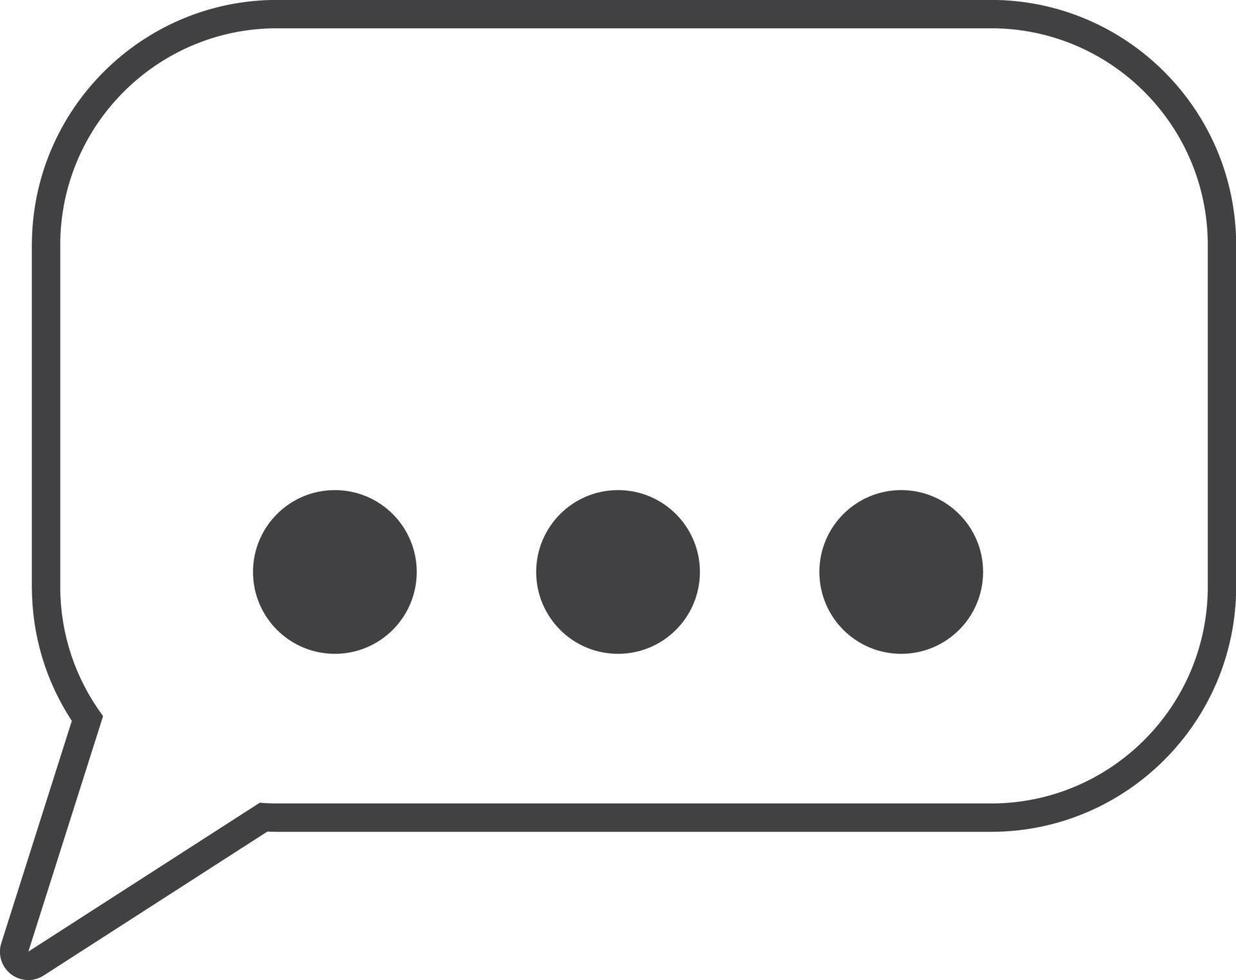 Message boxes and chats illustration in minimal style vector